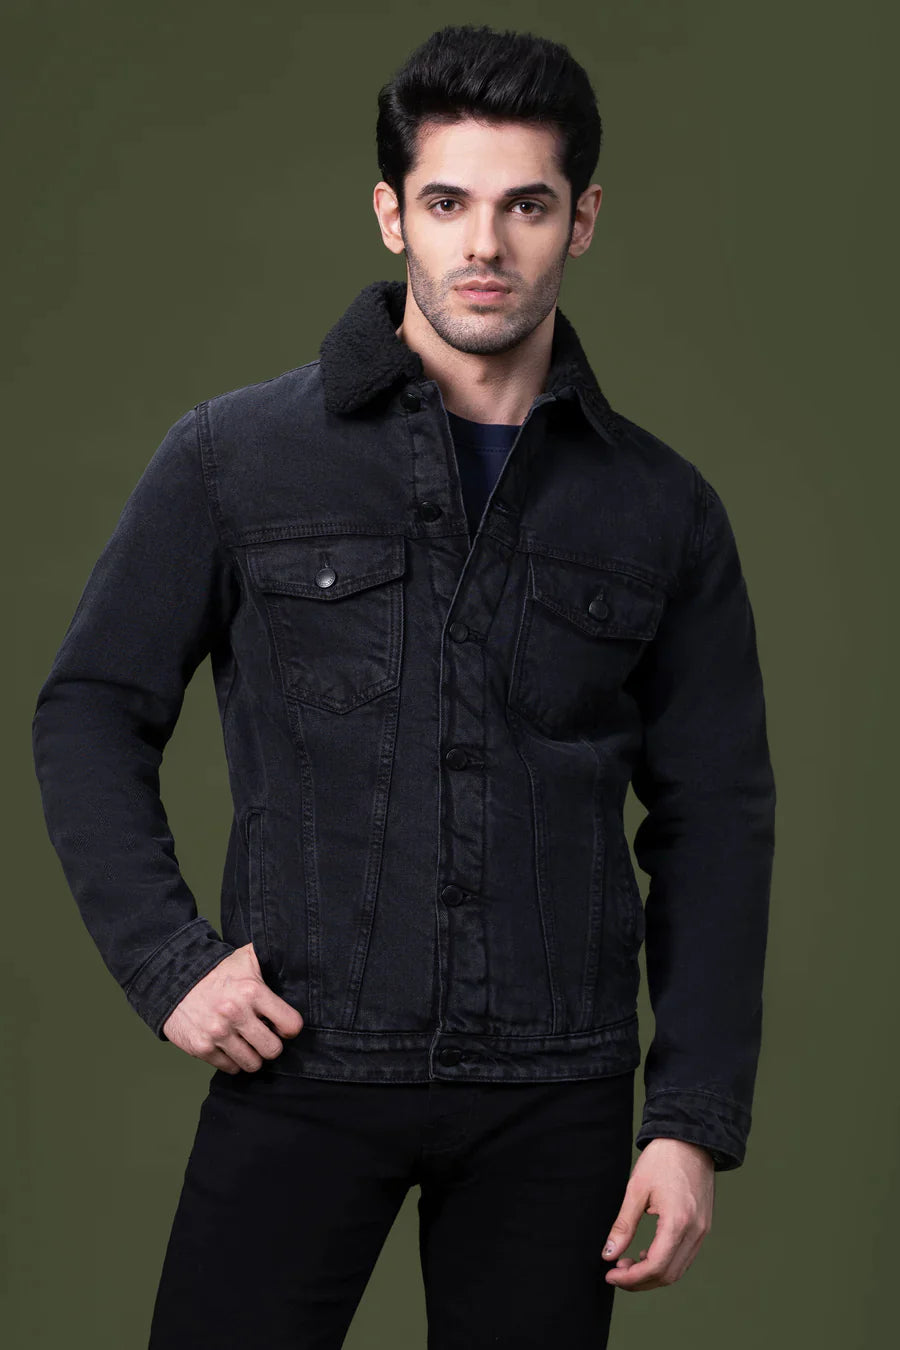 Buy Winter Jackets For Men at Best Price - Campussutra